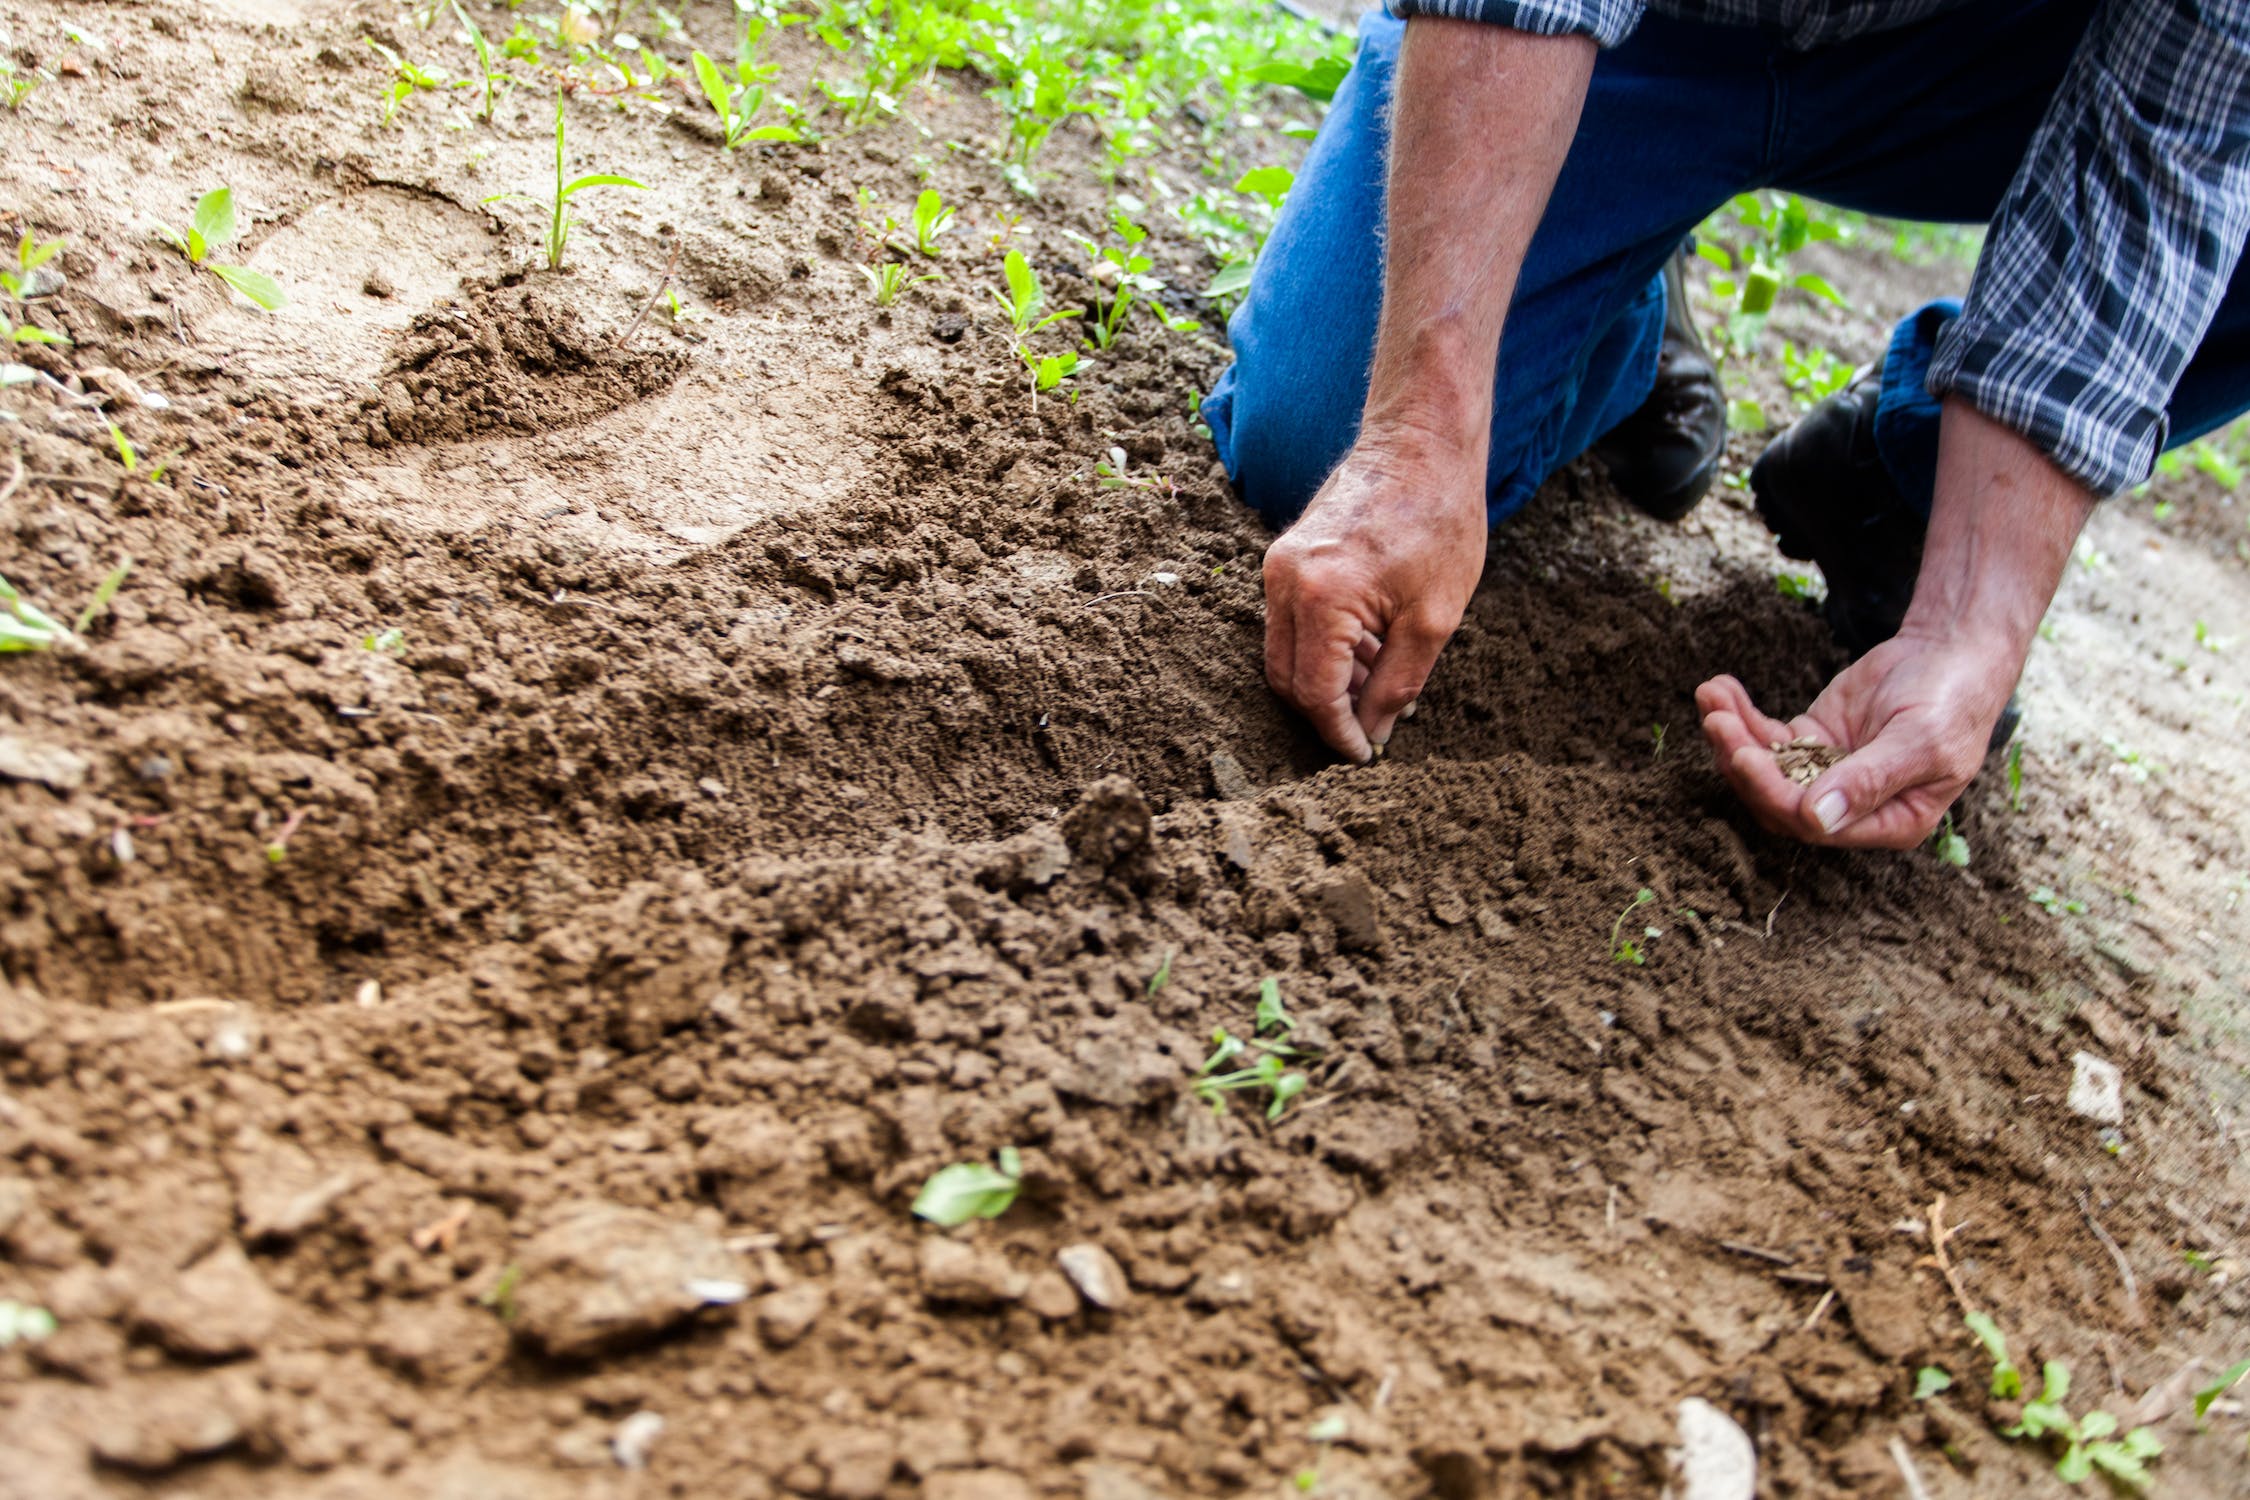 How to till soil by hand